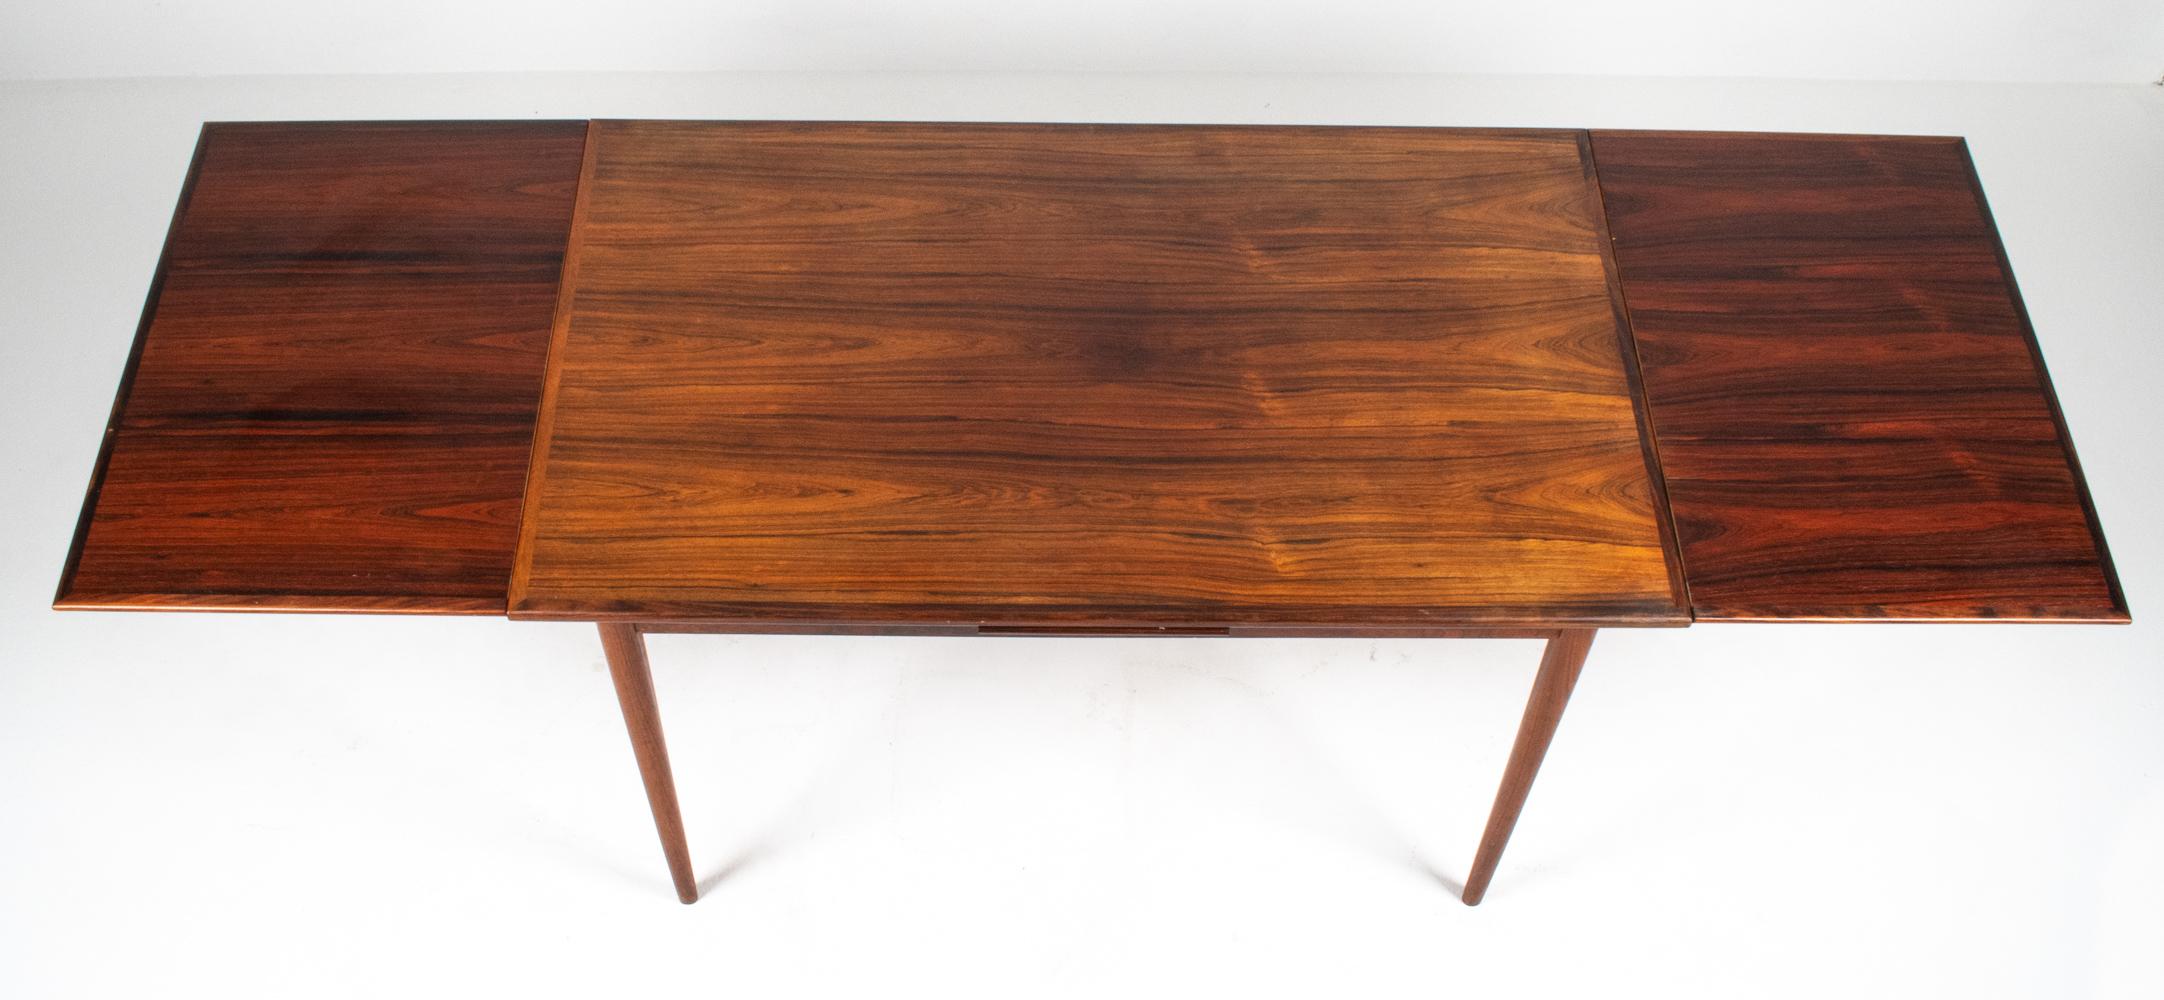 Danish Mid-Century Rosewood Extension Dining Table, c. 1960's For Sale 6